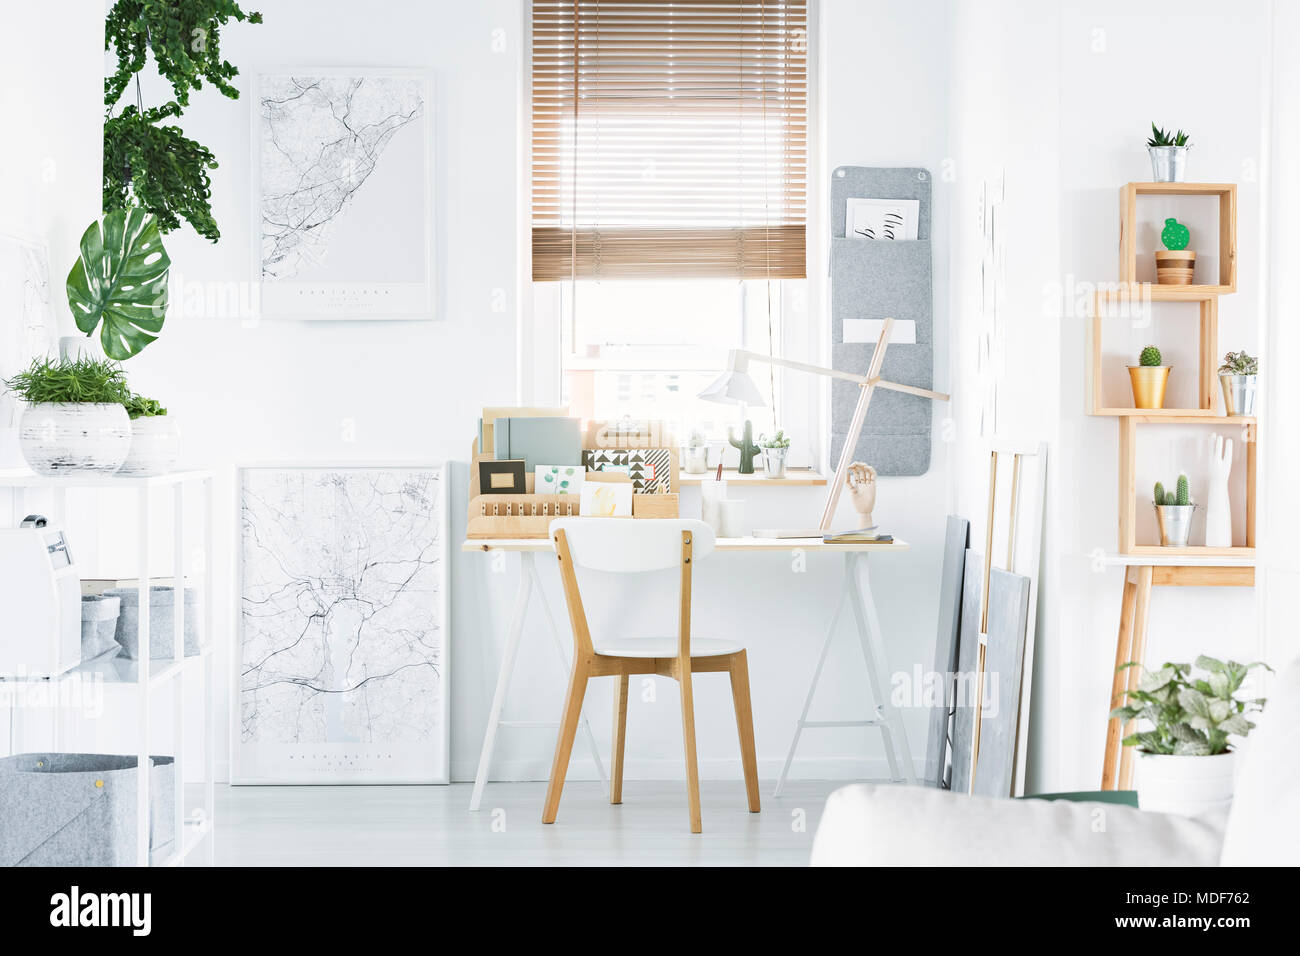 Bright home office interior with desk, wooden chair, shelf, plants and posters Stock Photo